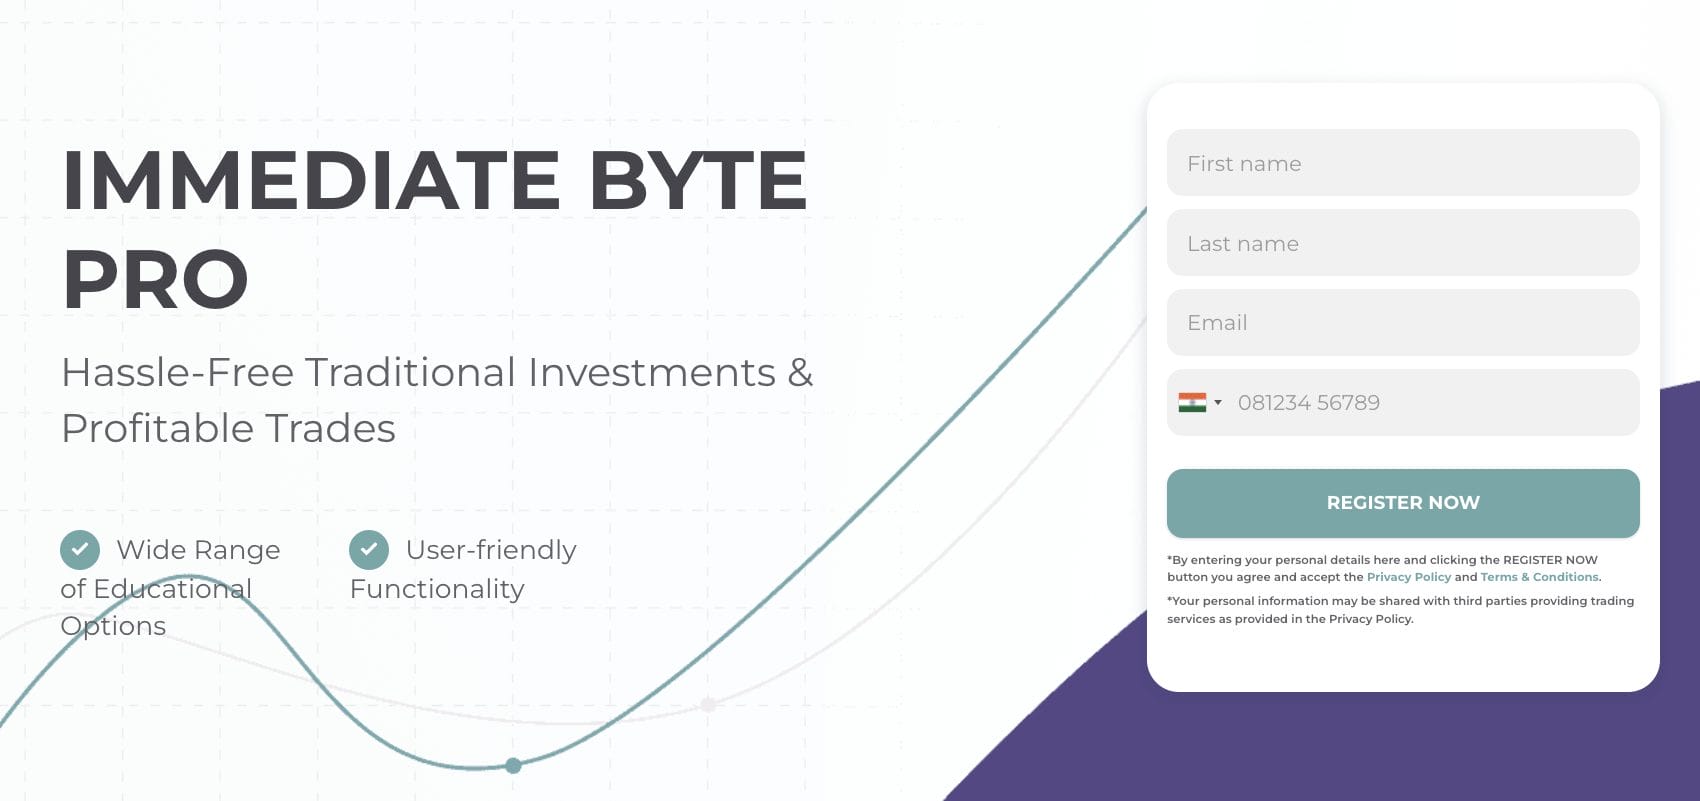 Immediate Byte Pro Review – Scam or Legitimate Trading Platform